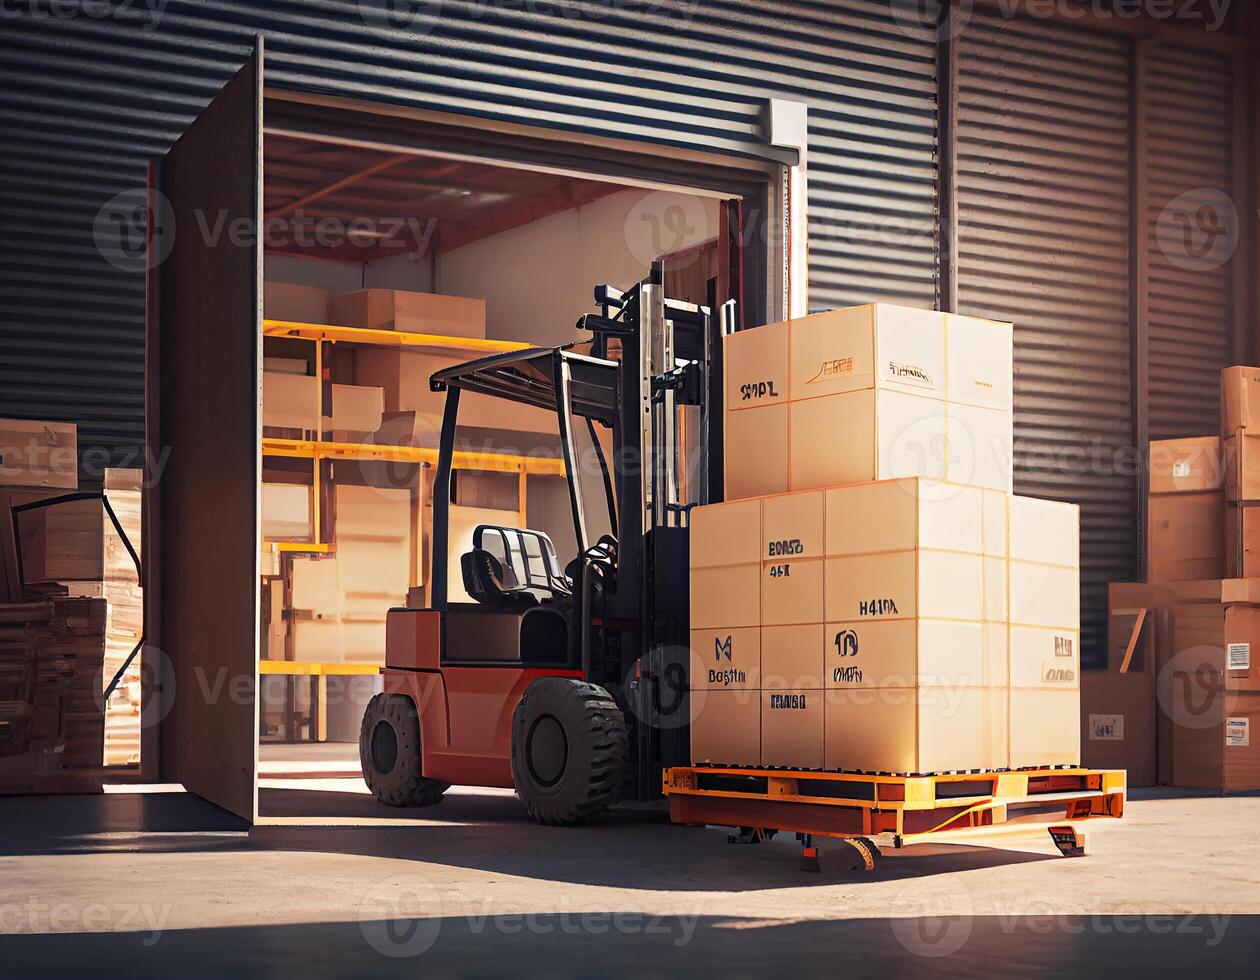 Forklift cartoon style center of logistic storage with wooden Warehouse industrial working storing material. photo